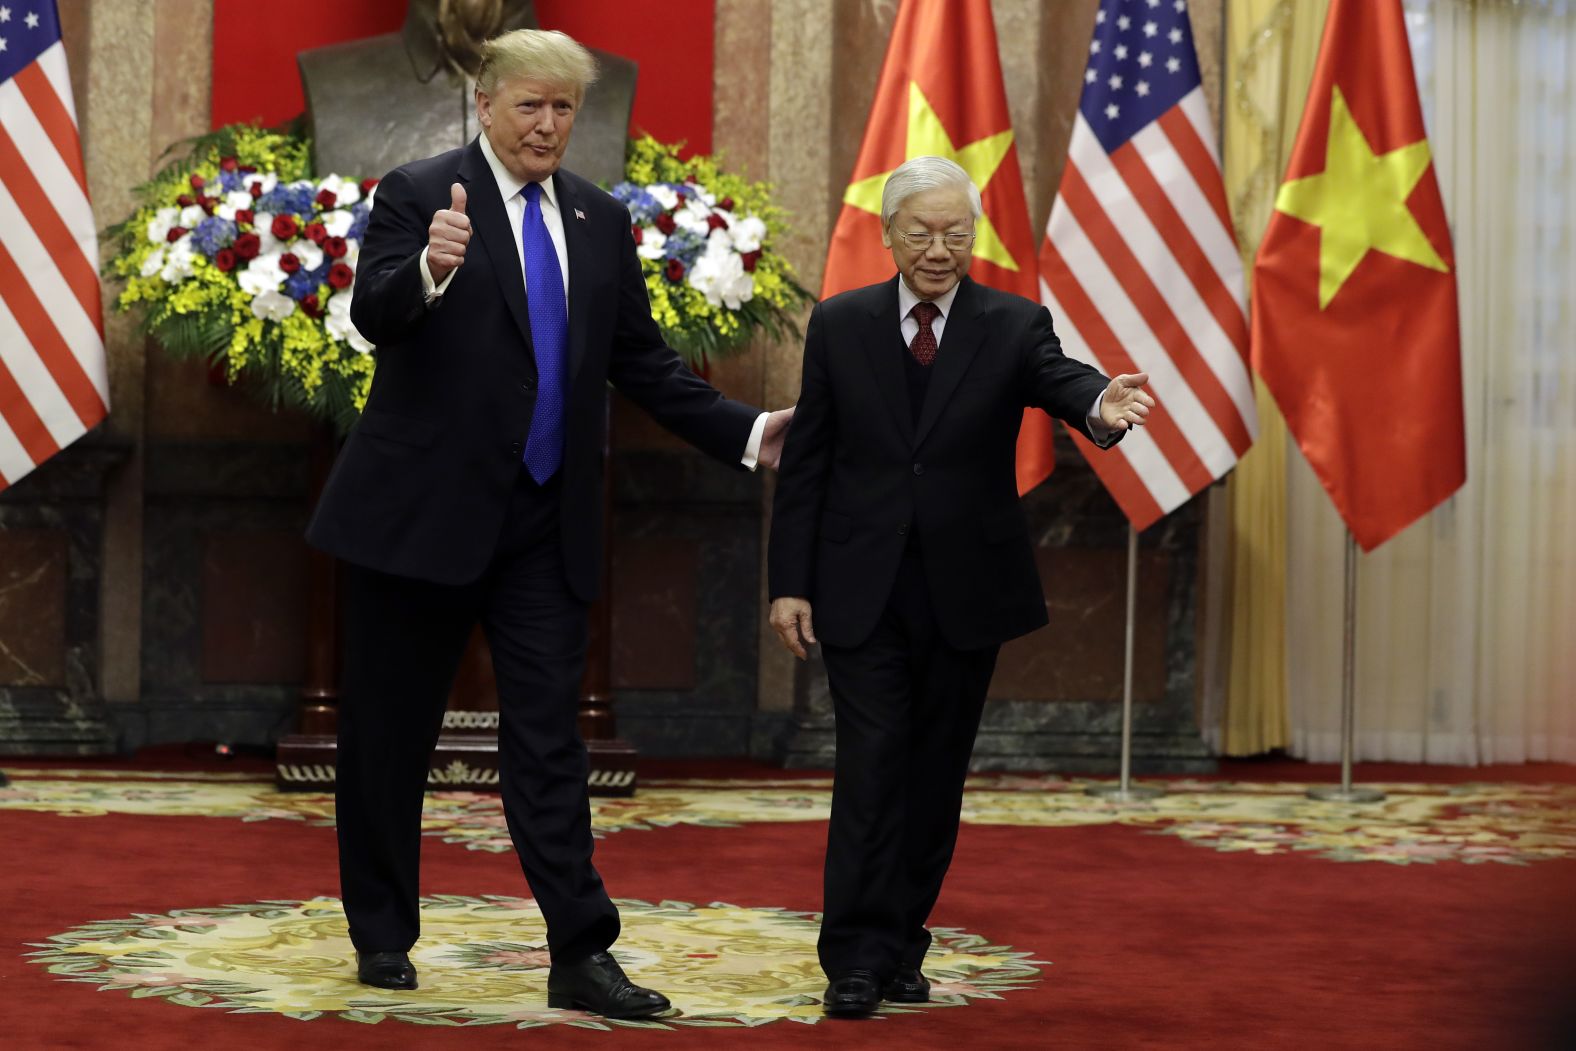 Trump also met with Vietnamese President Nguyen Phu Trong, who said his country has "made every effort" to ensure "the best conditions for the success of this very special meeting." <a href="index.php?page=&url=https%3A%2F%2Fwww.cnn.com%2Fpolitics%2Flive-news%2Ftrump-kim-jong-un-summit-vietnam-february-2019%2Fh_d0d9818e459b768e5197317f06b5859f" target="_blank">Trump pointed to Vietnam</a> as a "good example of what could happen" if North Korea denuclearizes and achieves peace with the United States.